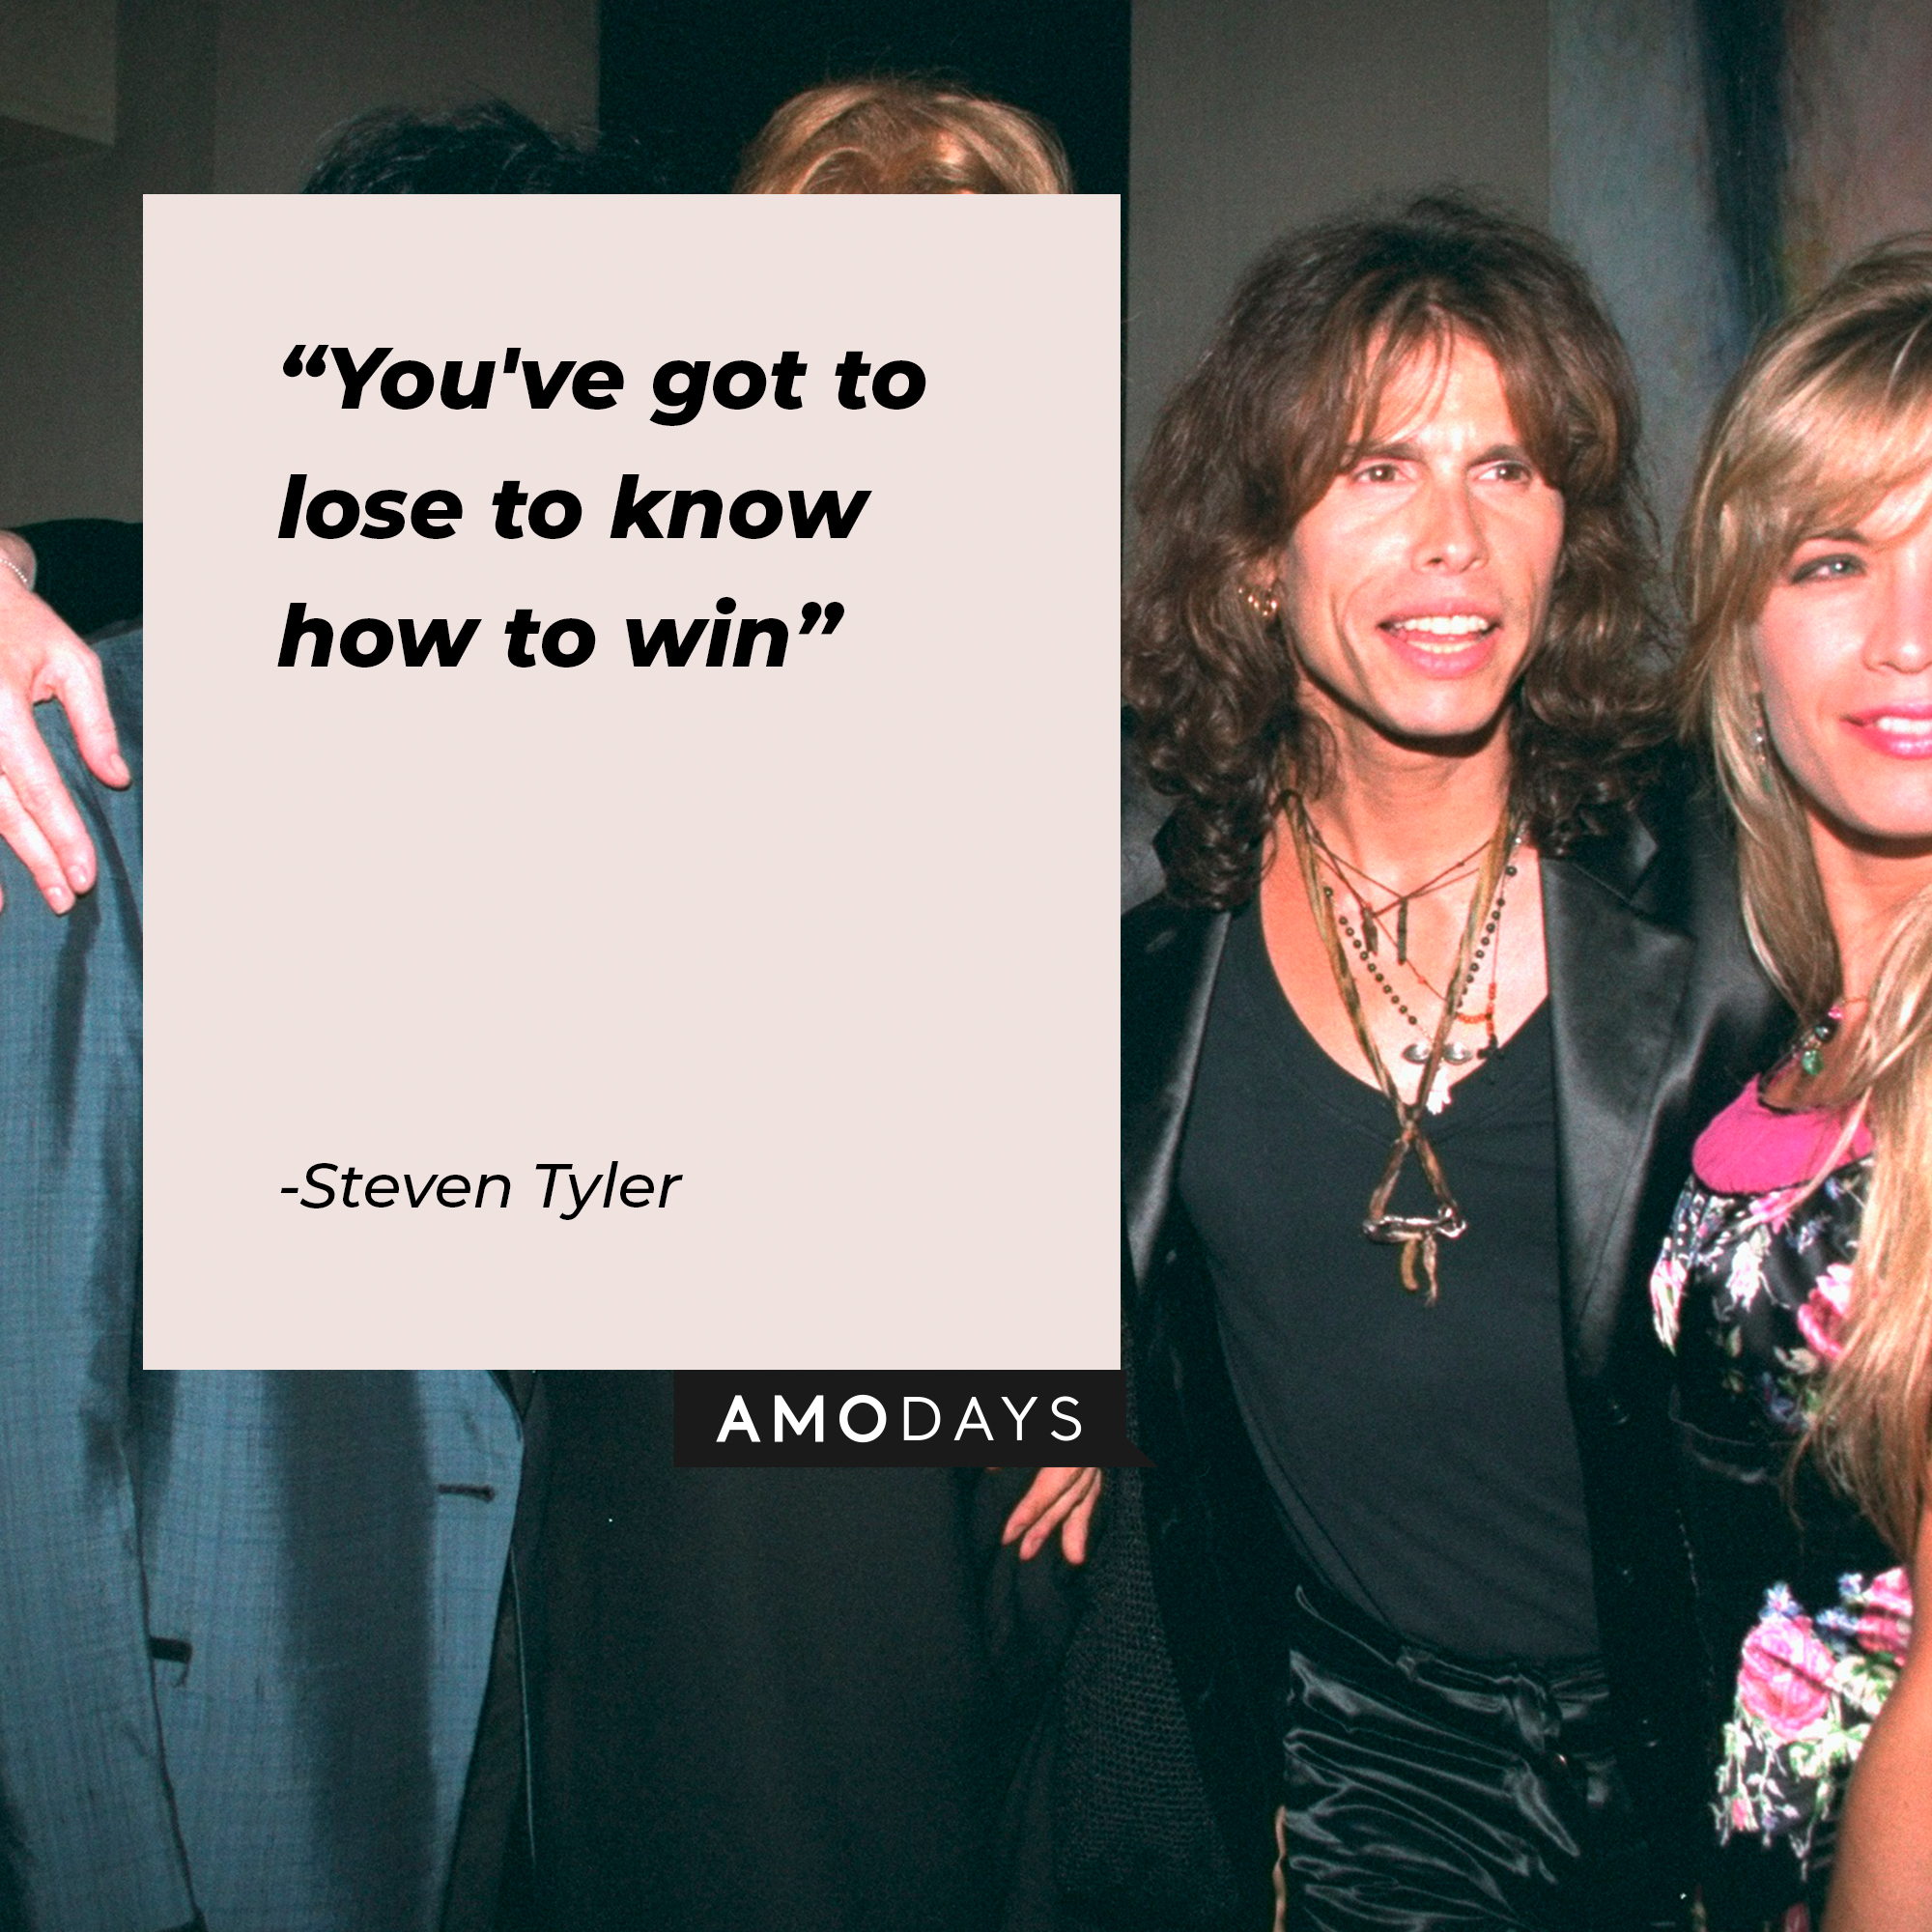 Steven Tyler's quote: "You've got to lose to know how to win." | Source: Getty Images